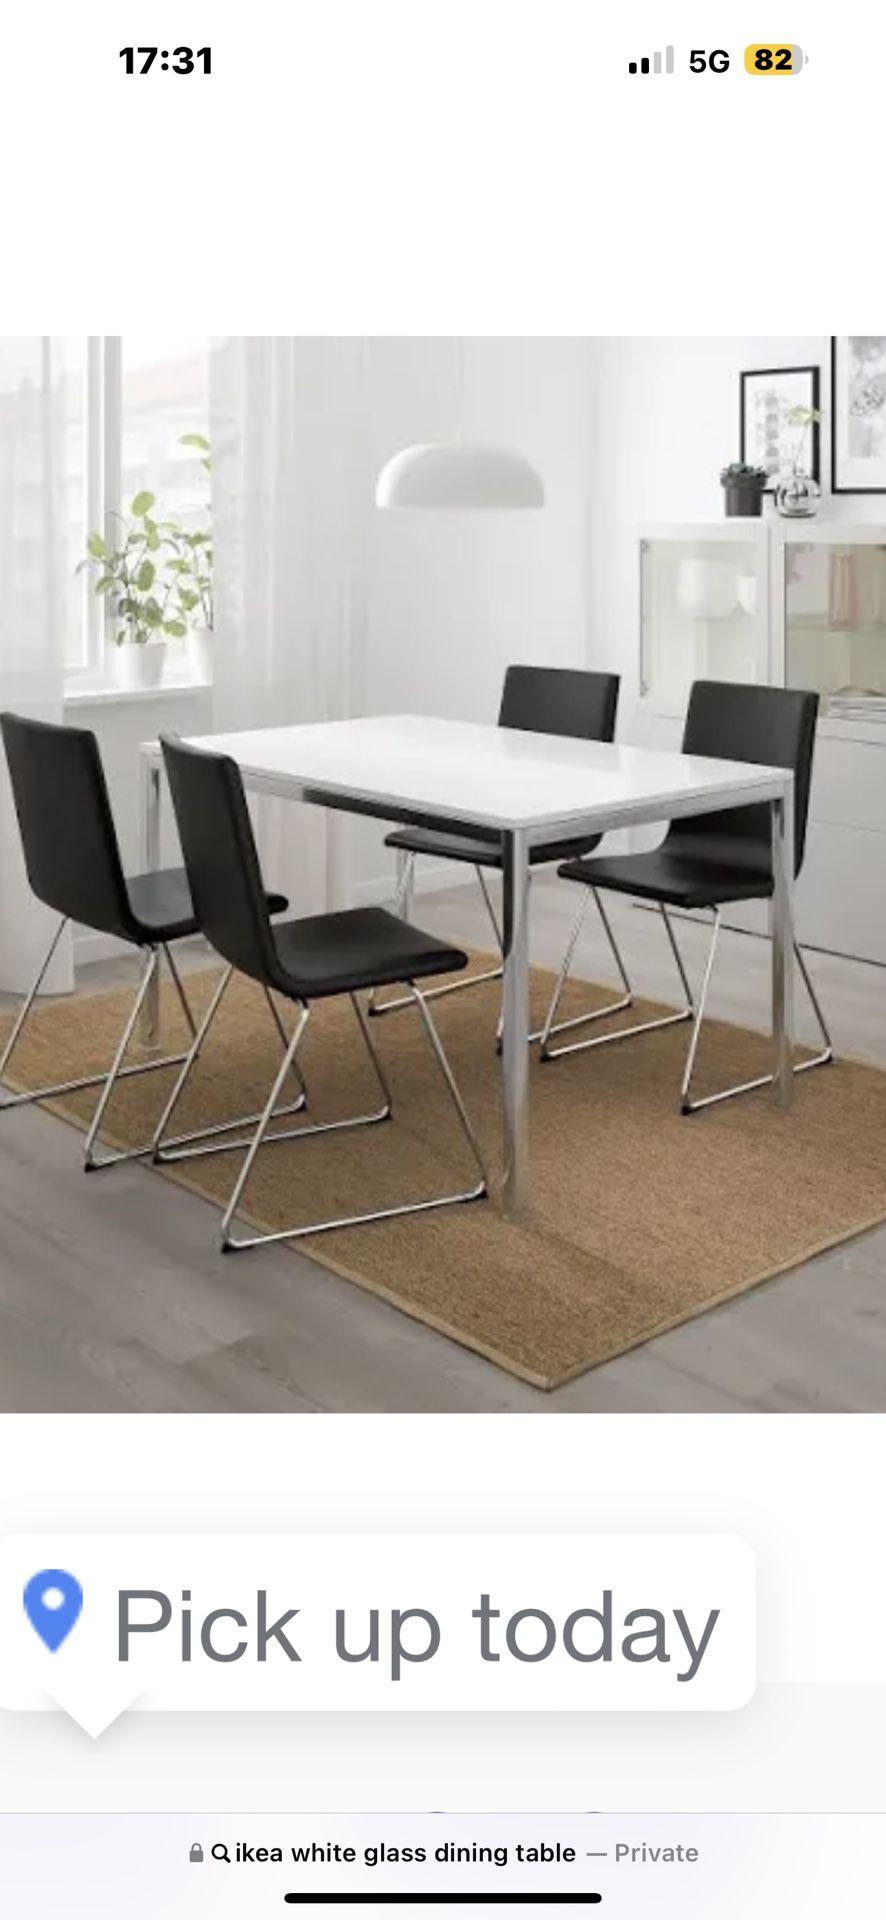 FREE 4 black faux leather chairs, The White Glass Dining table for 4 For $90